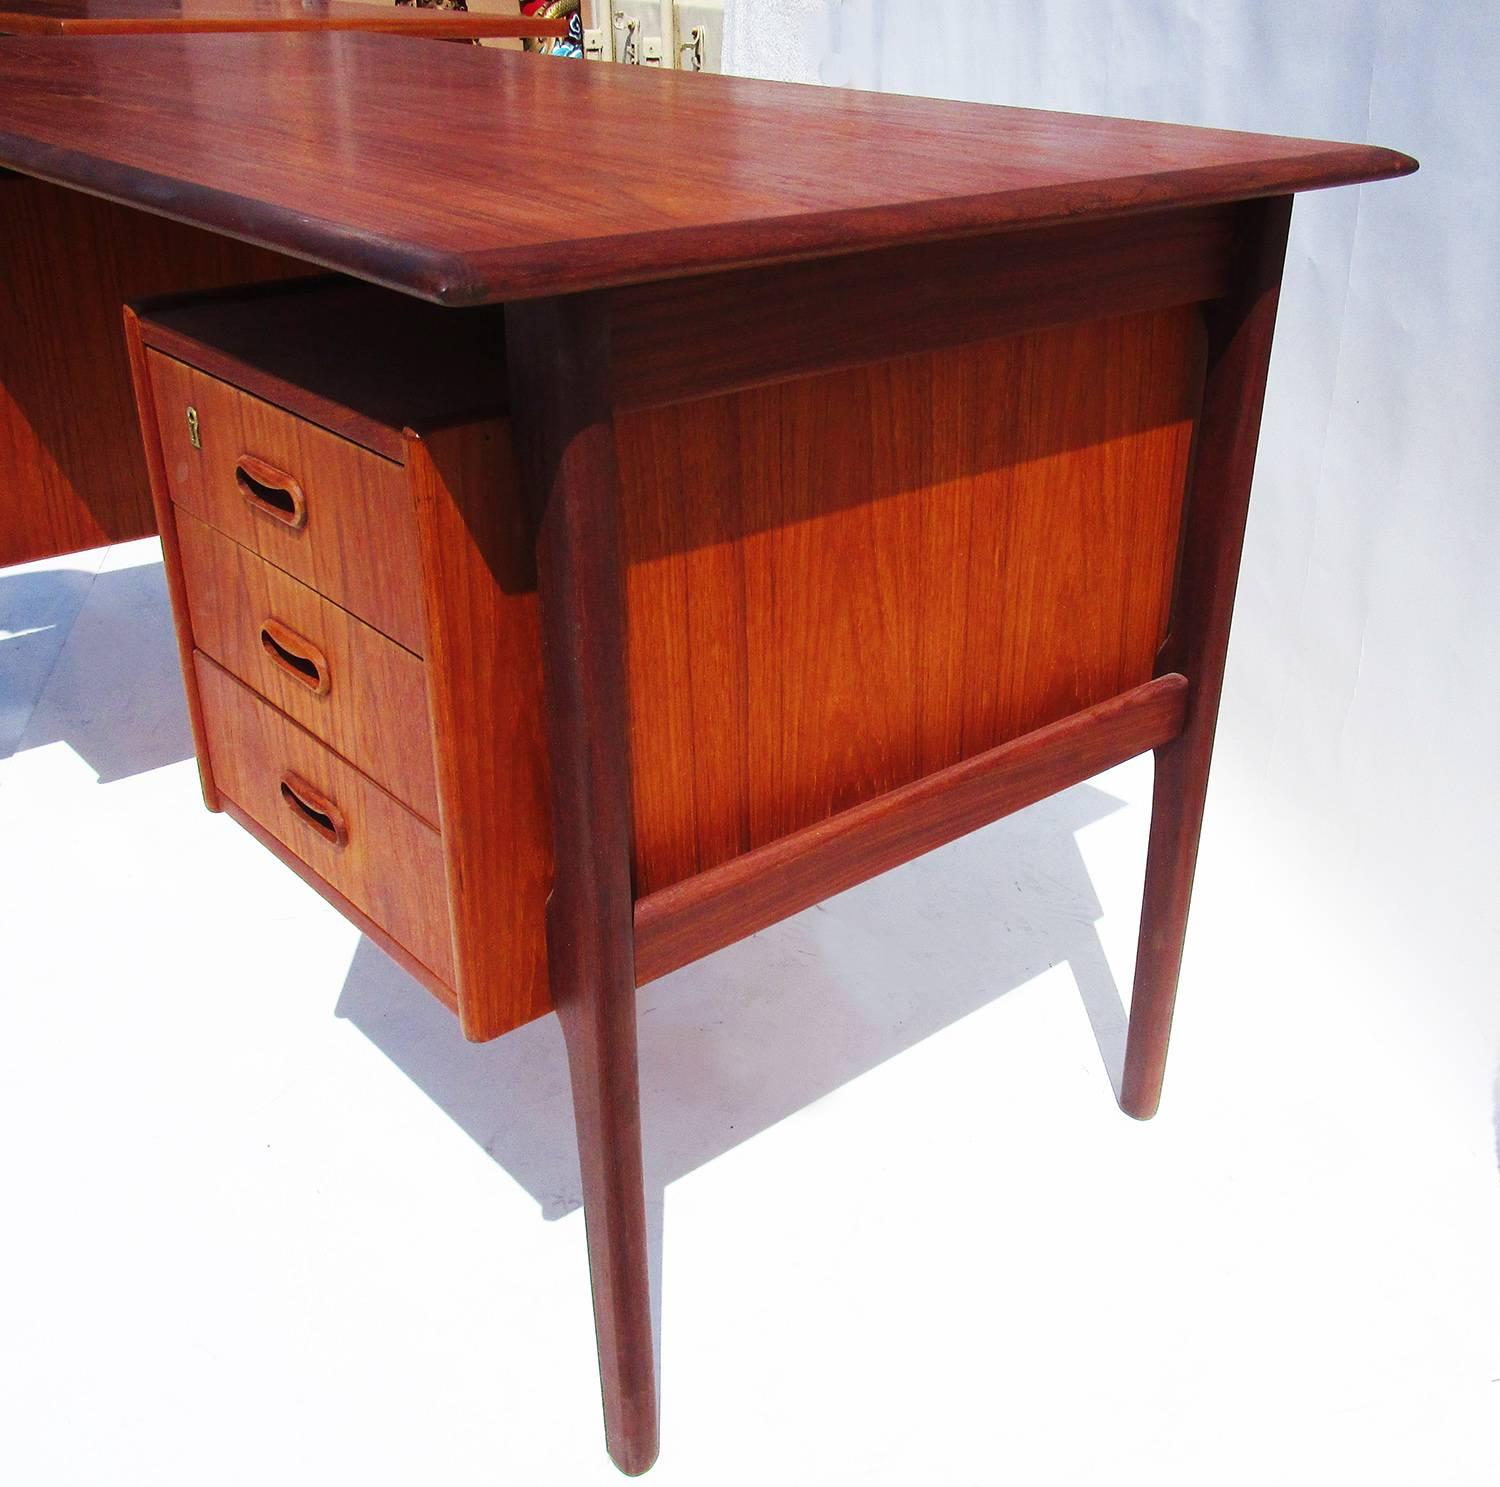 Danish Modern Teak Desk with Bookcase Front In Good Condition For Sale In North Hollywood, CA